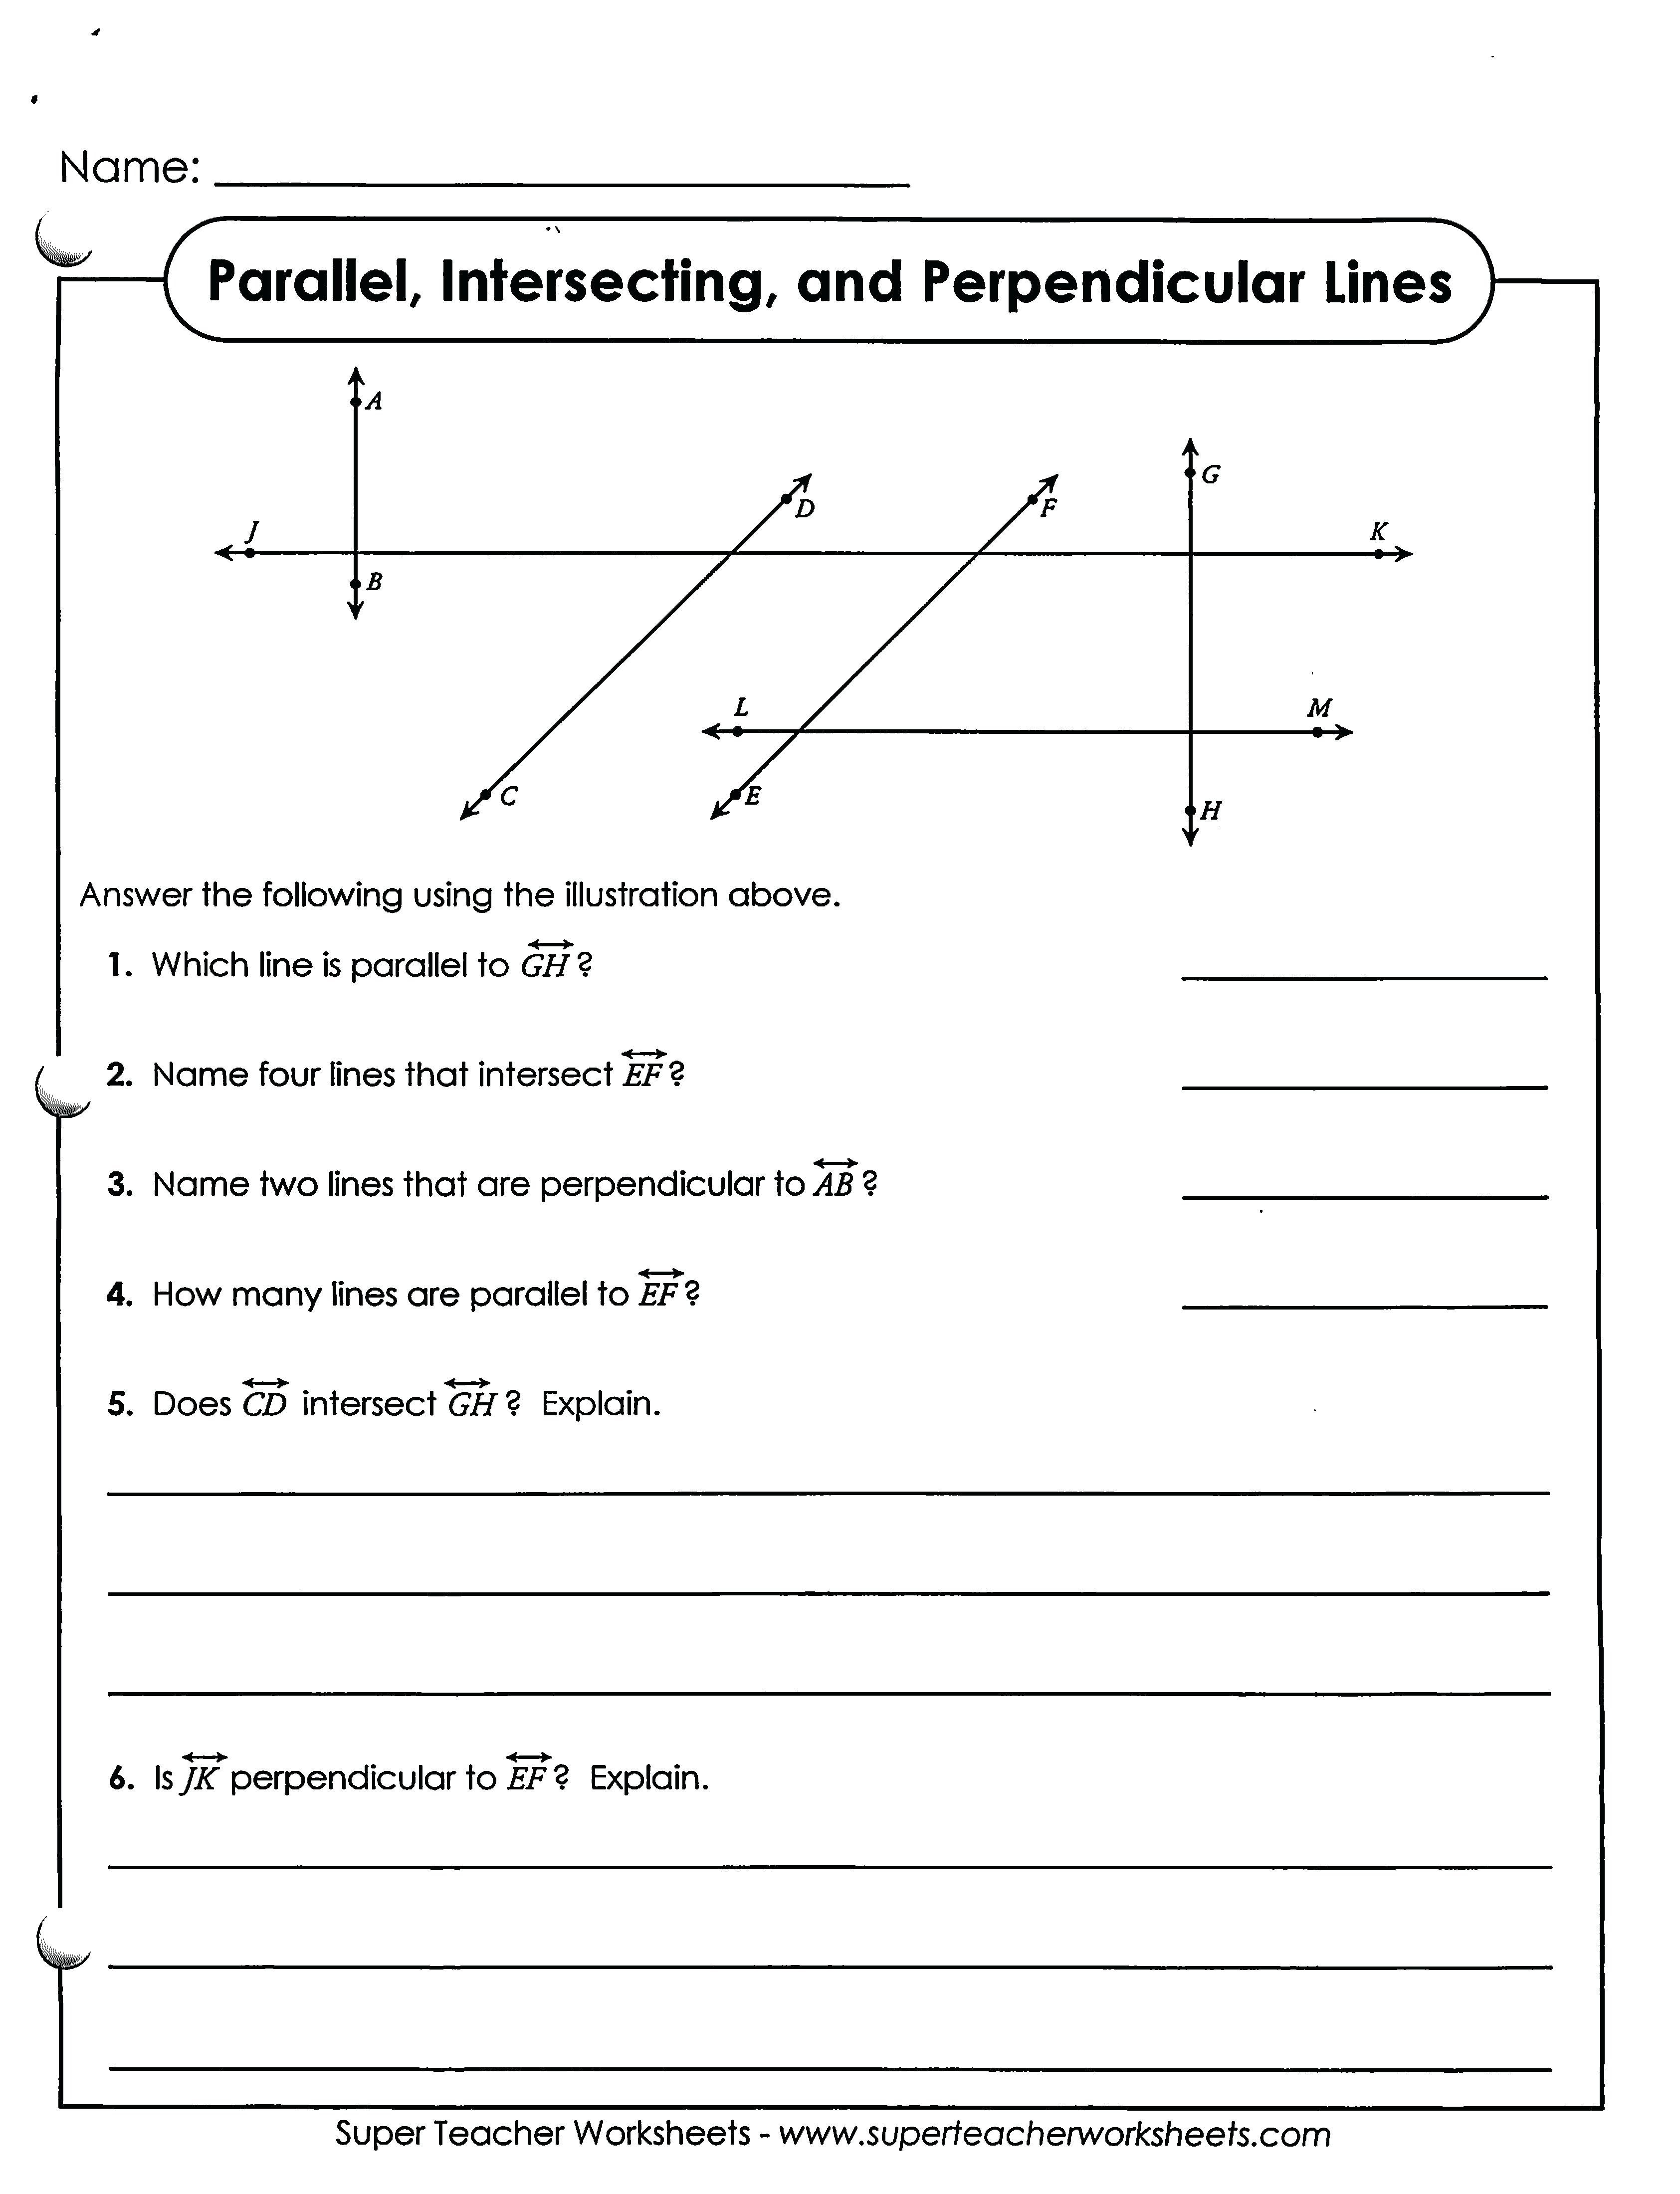 Parallel And Perpendicular Lines Worksheet Answers  Yooob Regarding Parallel Lines Worksheet Answers